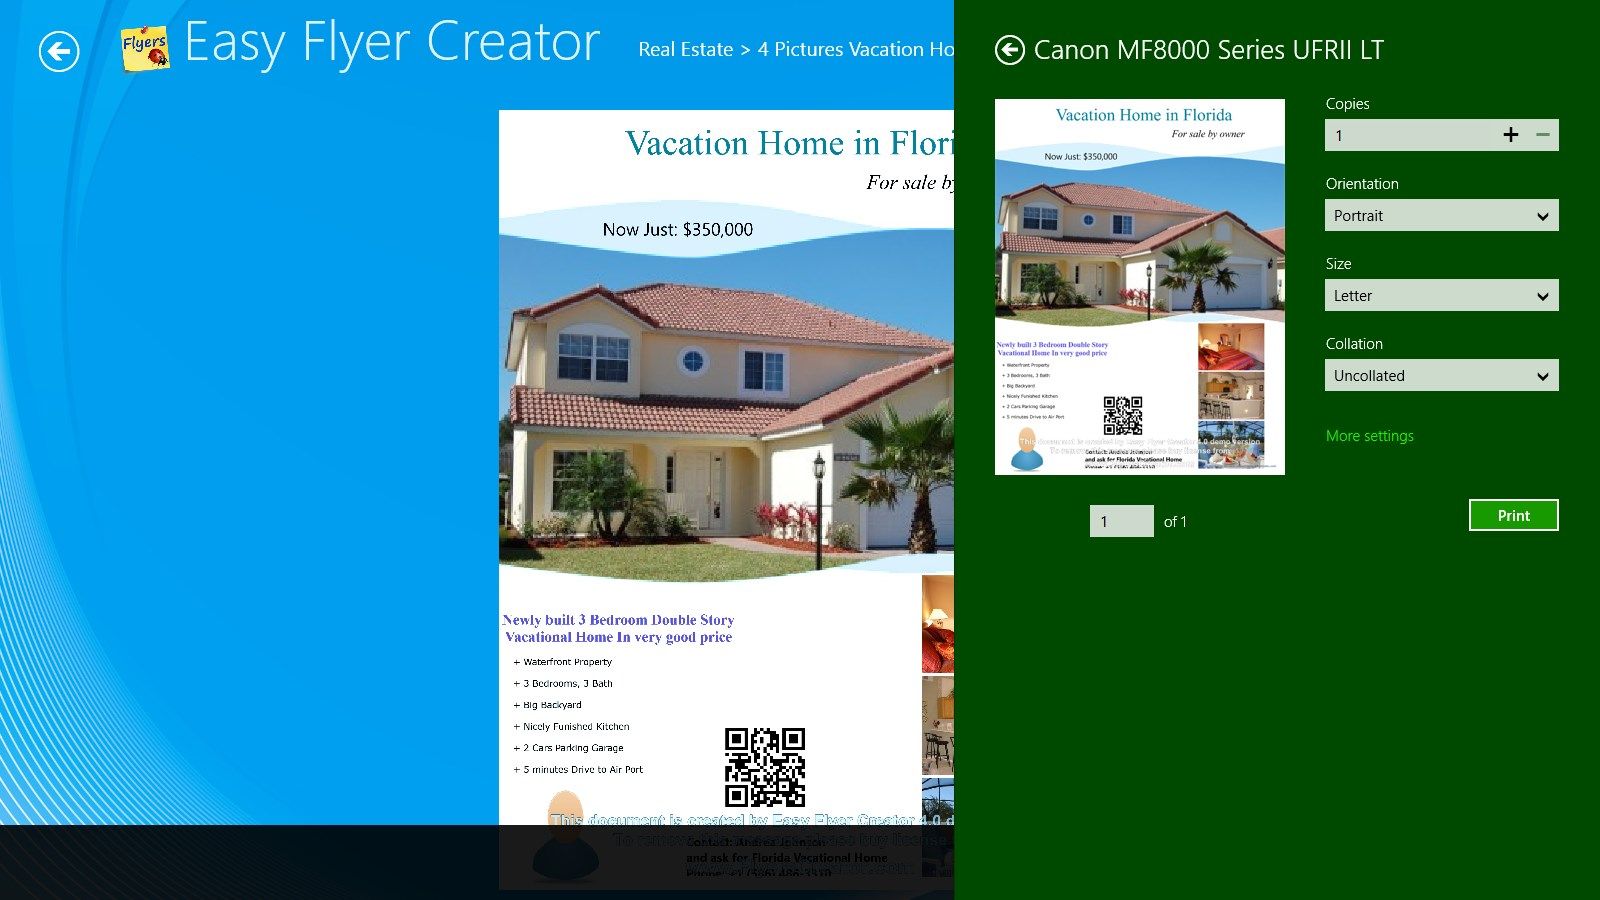 Preview, Print or Save the Flyer Document as Image File like JPG, PNG, BMP, TIFF